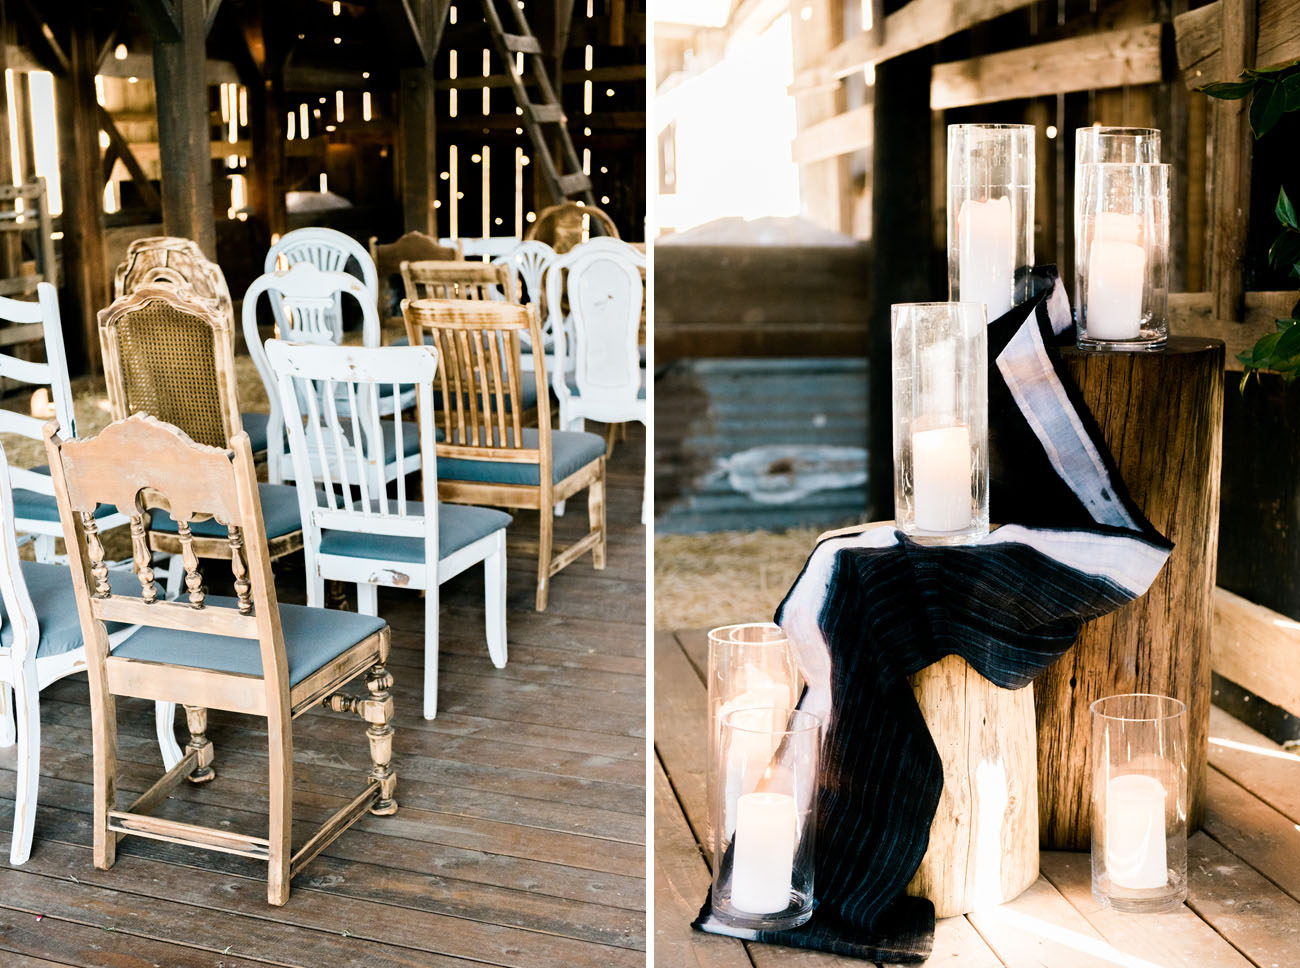 Mismatching chairs and wood logs will add a rustic feel to your wedding